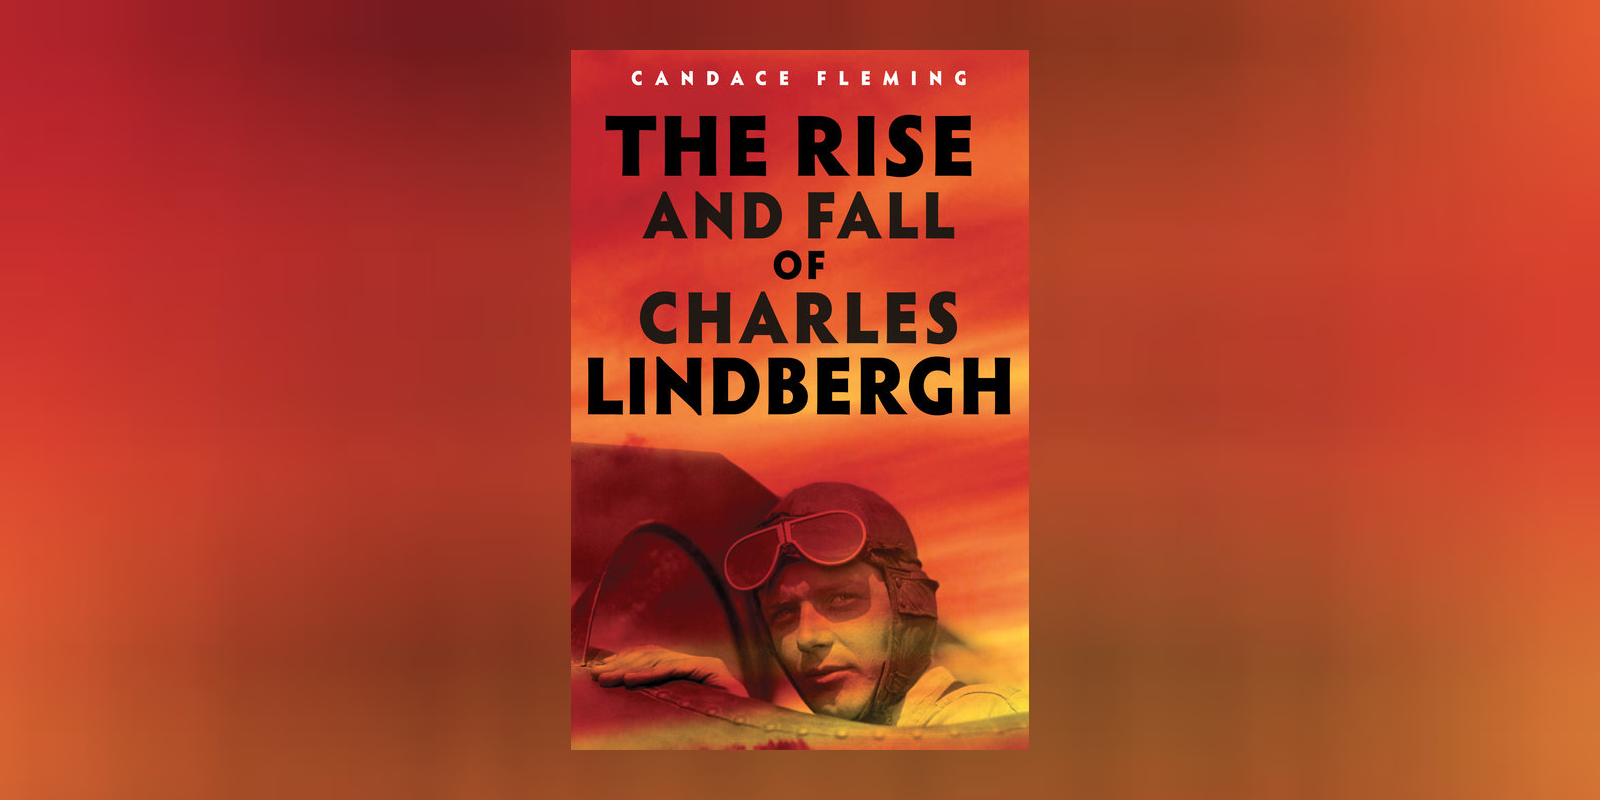 Author Essay: <i>The Rise and Fall of Charles Lindbergh</i> by Candace Fleming